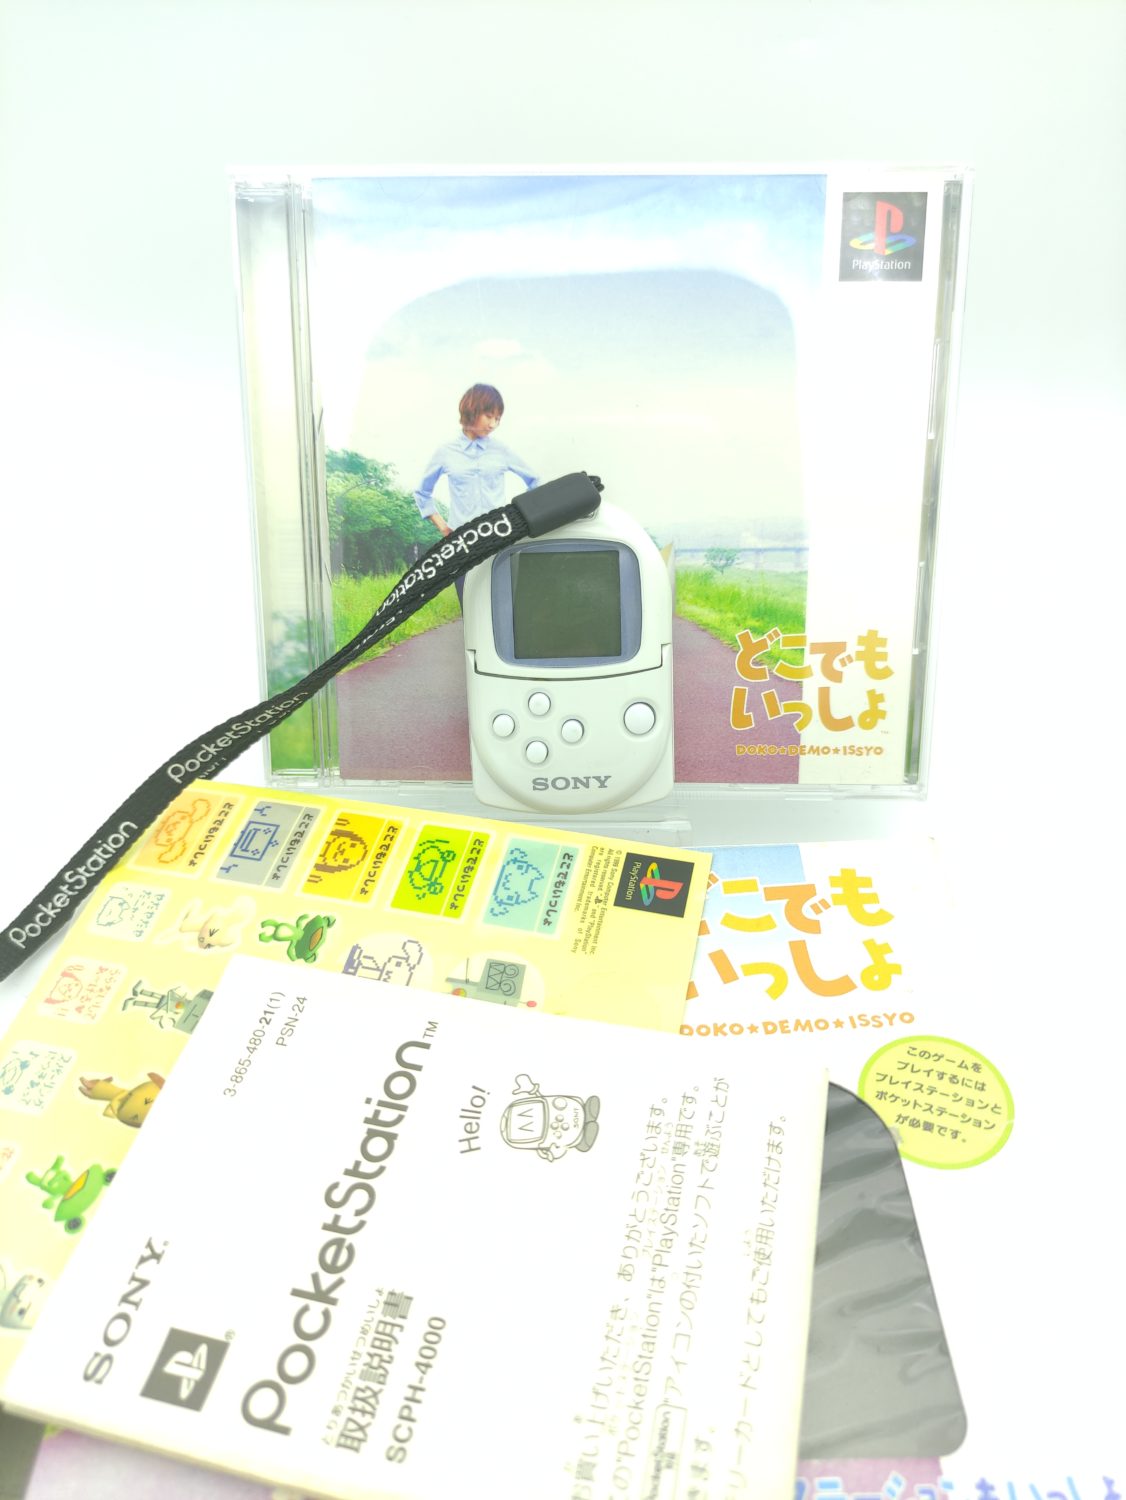 Sony Pocket Station memory card white In Box Manual SCPH-4000 Japan Boutique-Tamagotchis